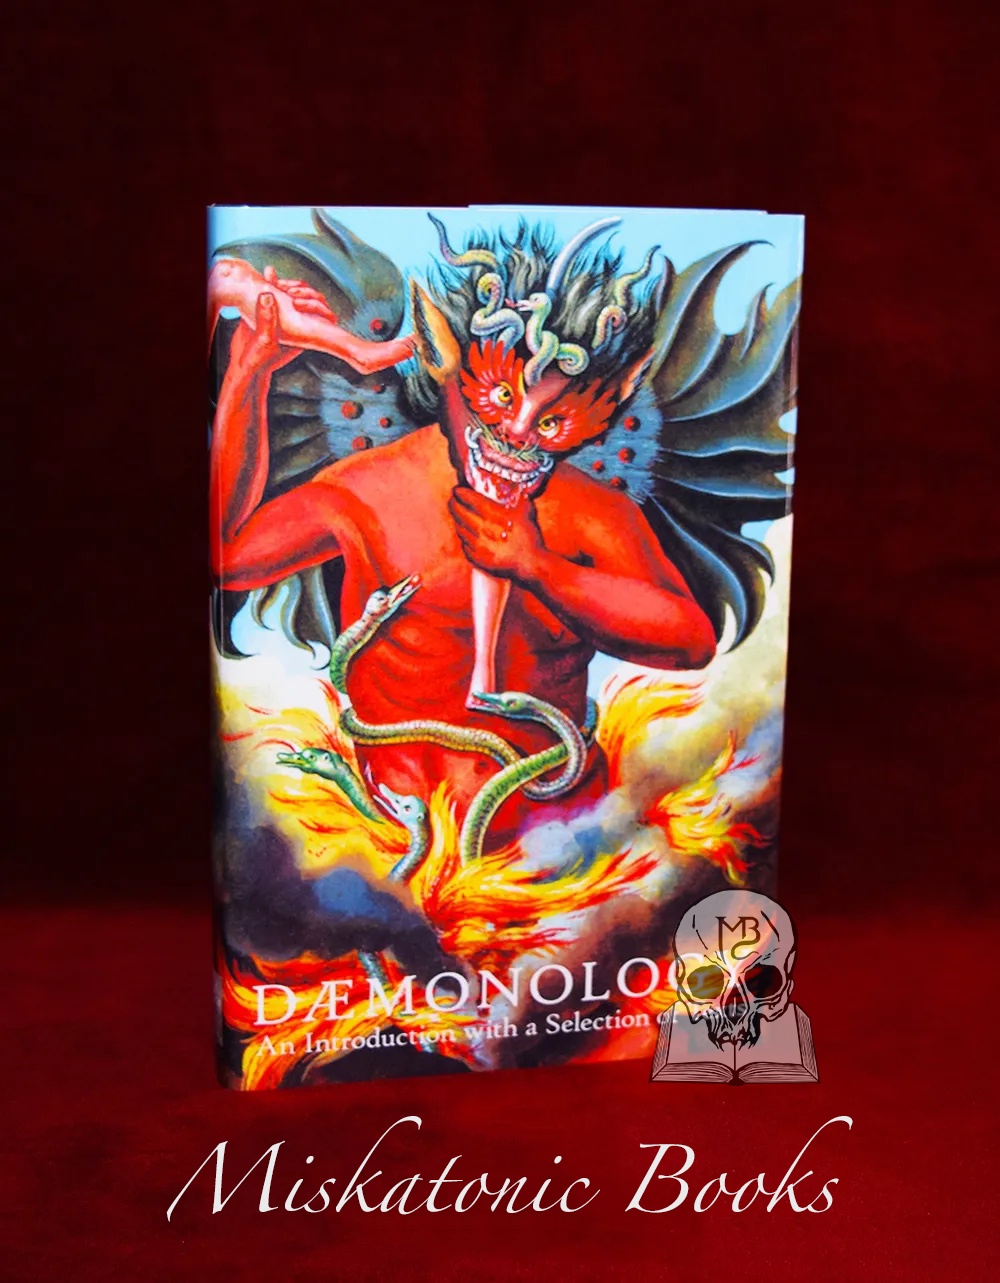 DAEMONOLOGY: An Introduction With a Selection of Texts by Humberto Maggi - Hardcover Edition